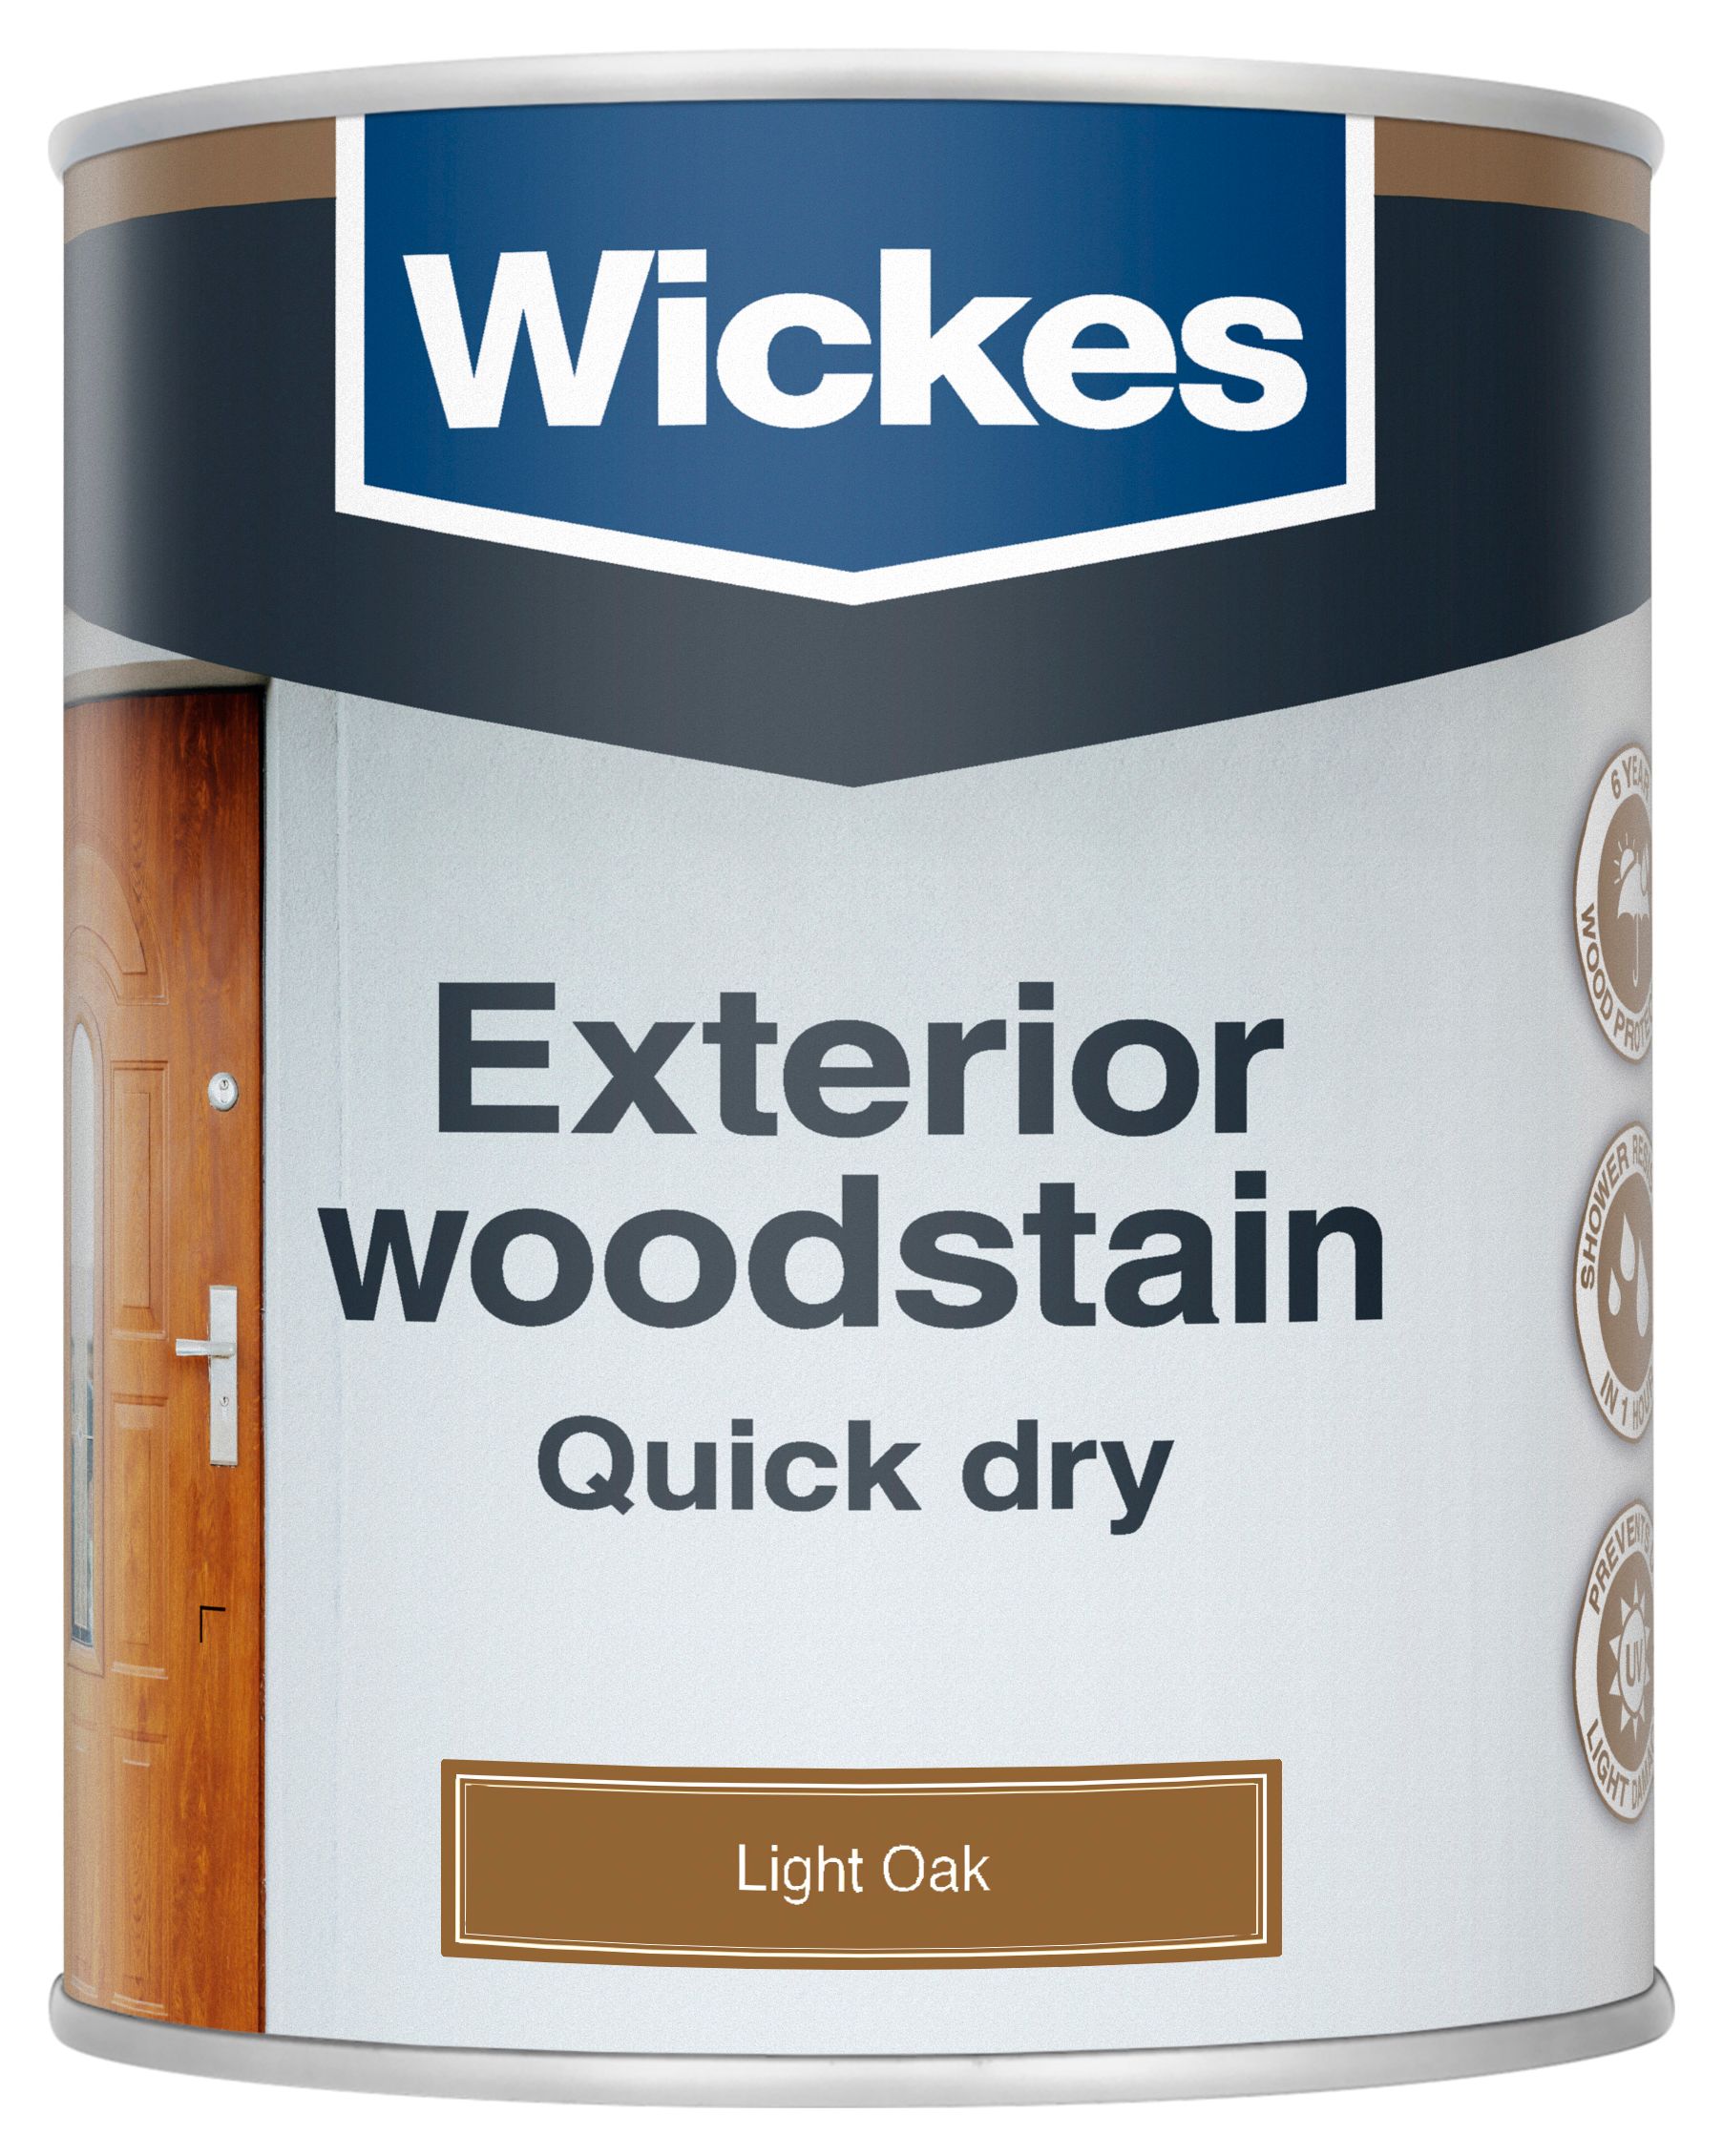 Image of Wickes Exterior Quick Dry Woodstain - Light Oak - 750ml